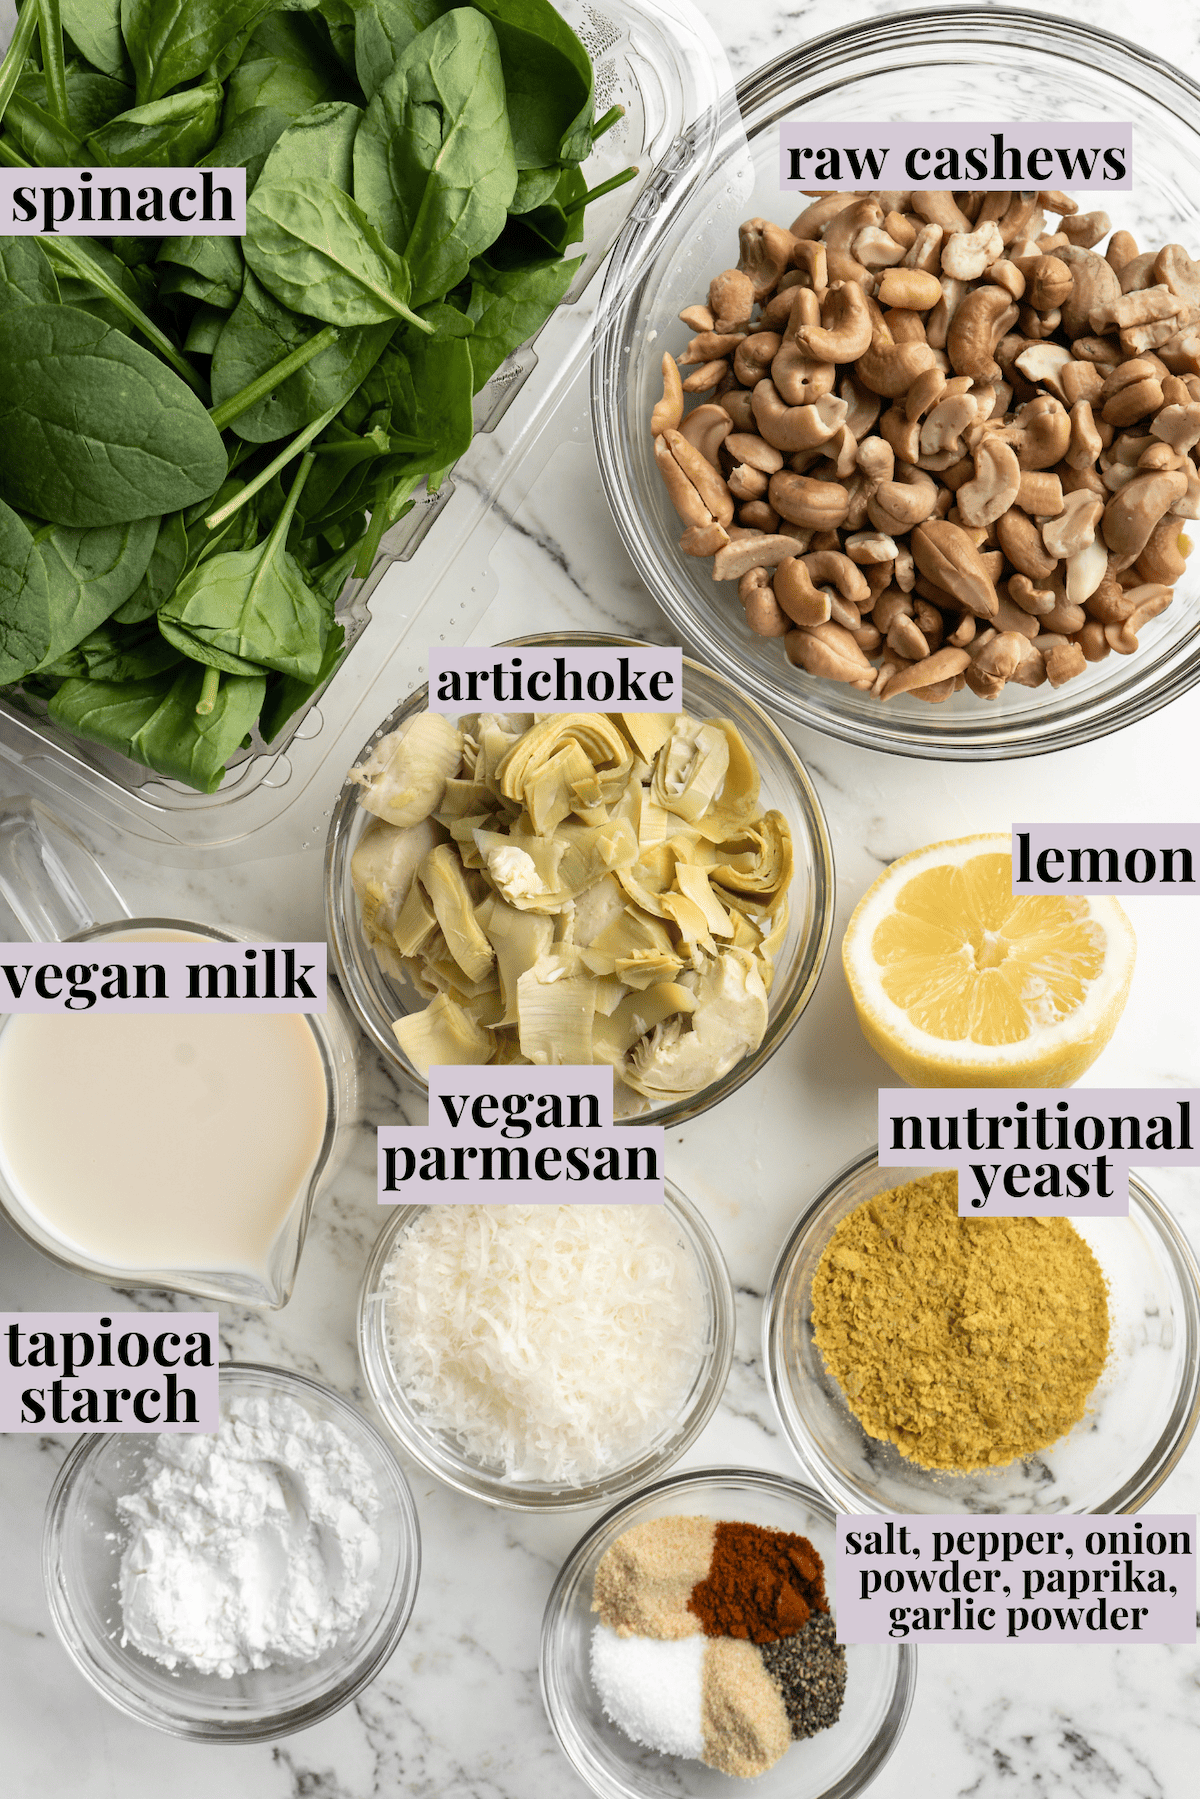 Overhead view of ingredients for vegan spinach artichoke dip with labels